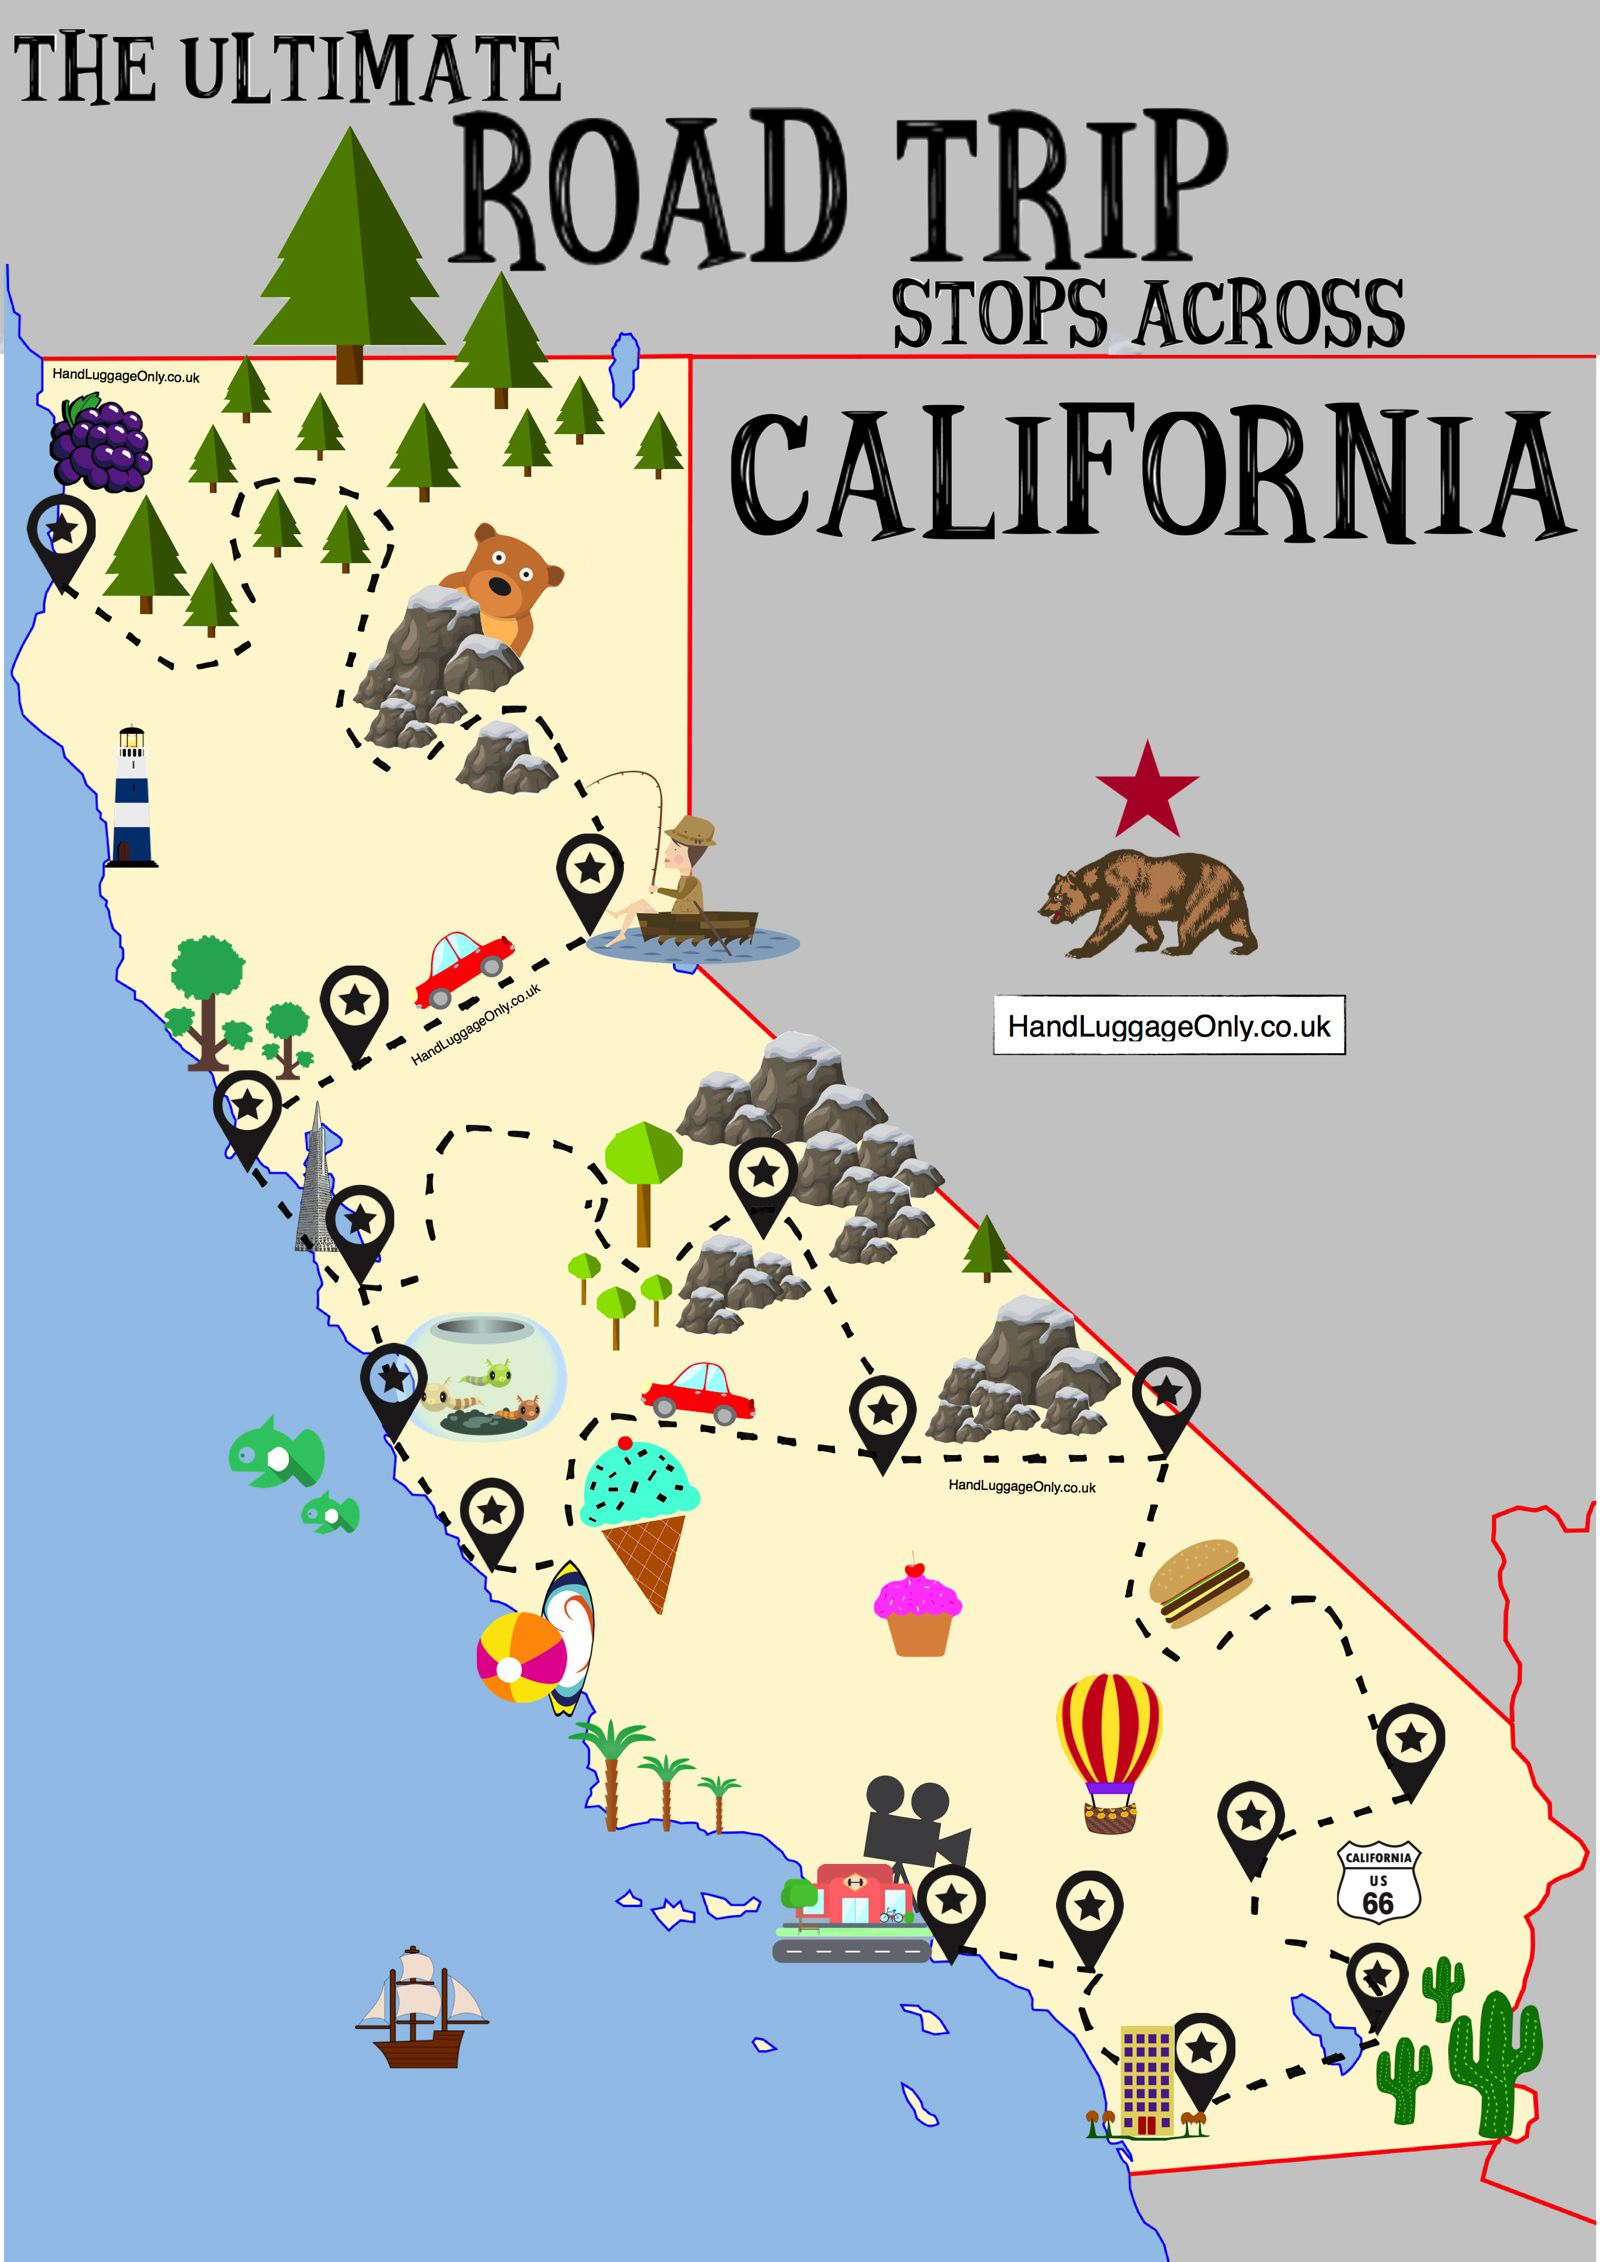 The Ultimate Road Trip Map Of Places To Visit In California - Hand - Map Of California Coast Cities